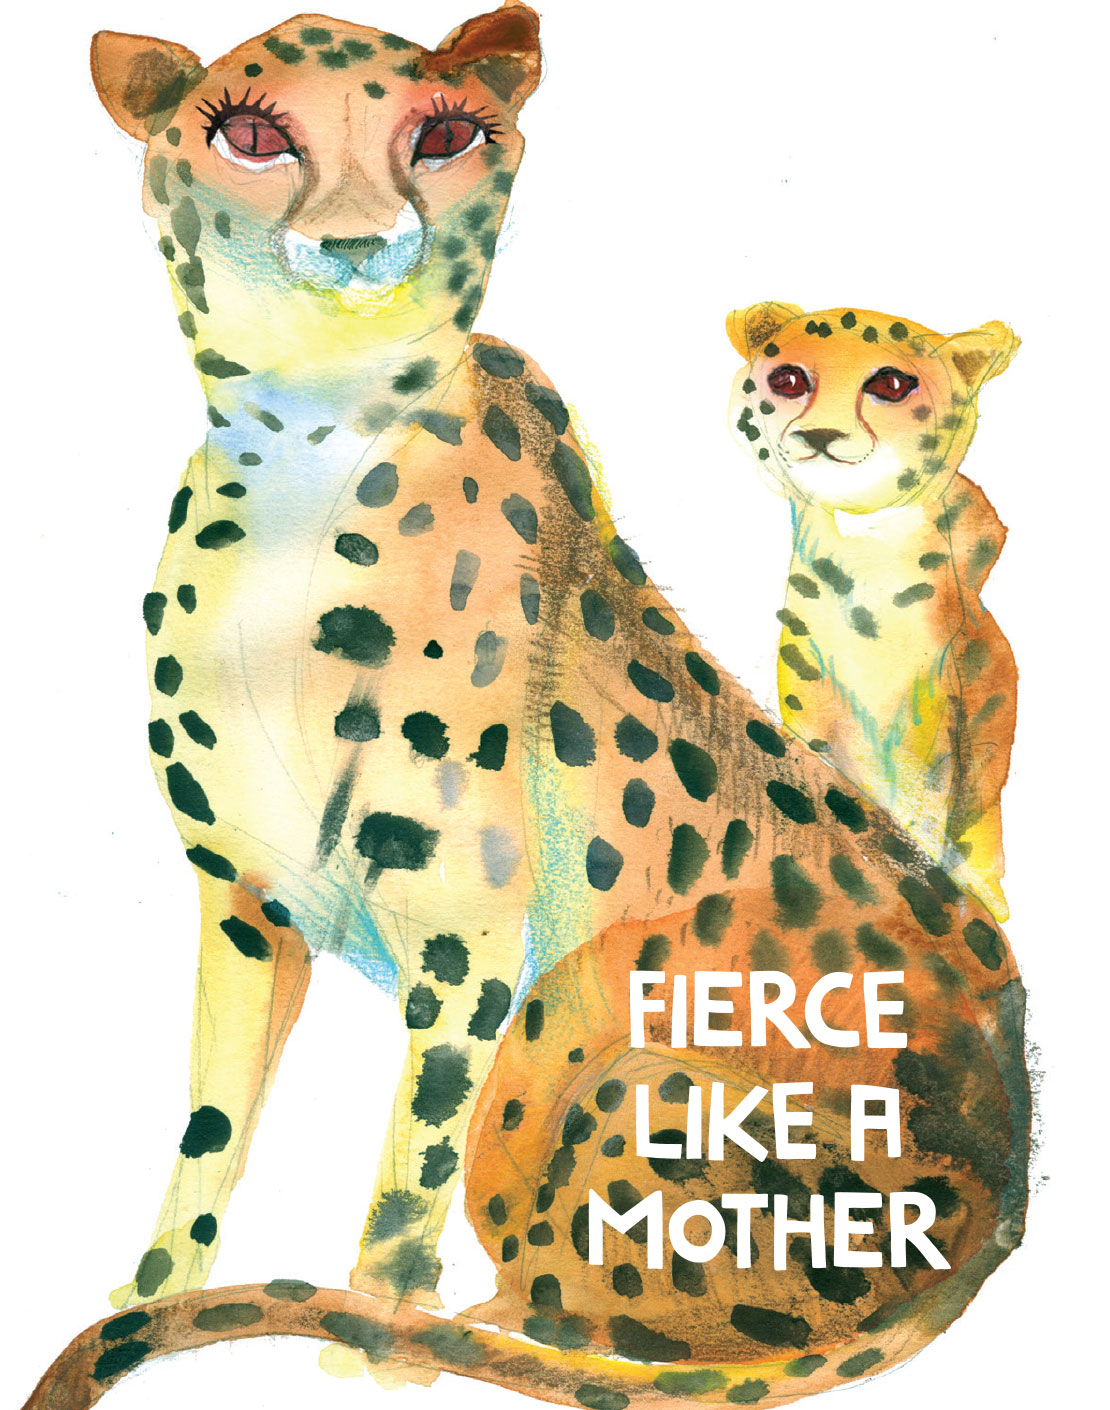 Mother's Day through art. Fierce Mom is features a beautiful cheetah and her devoted baby in the wild. Show your love to the most important shero with this Masha D’yans mother's day greeting card featuring a characteristic flight of watercolor whimsy.